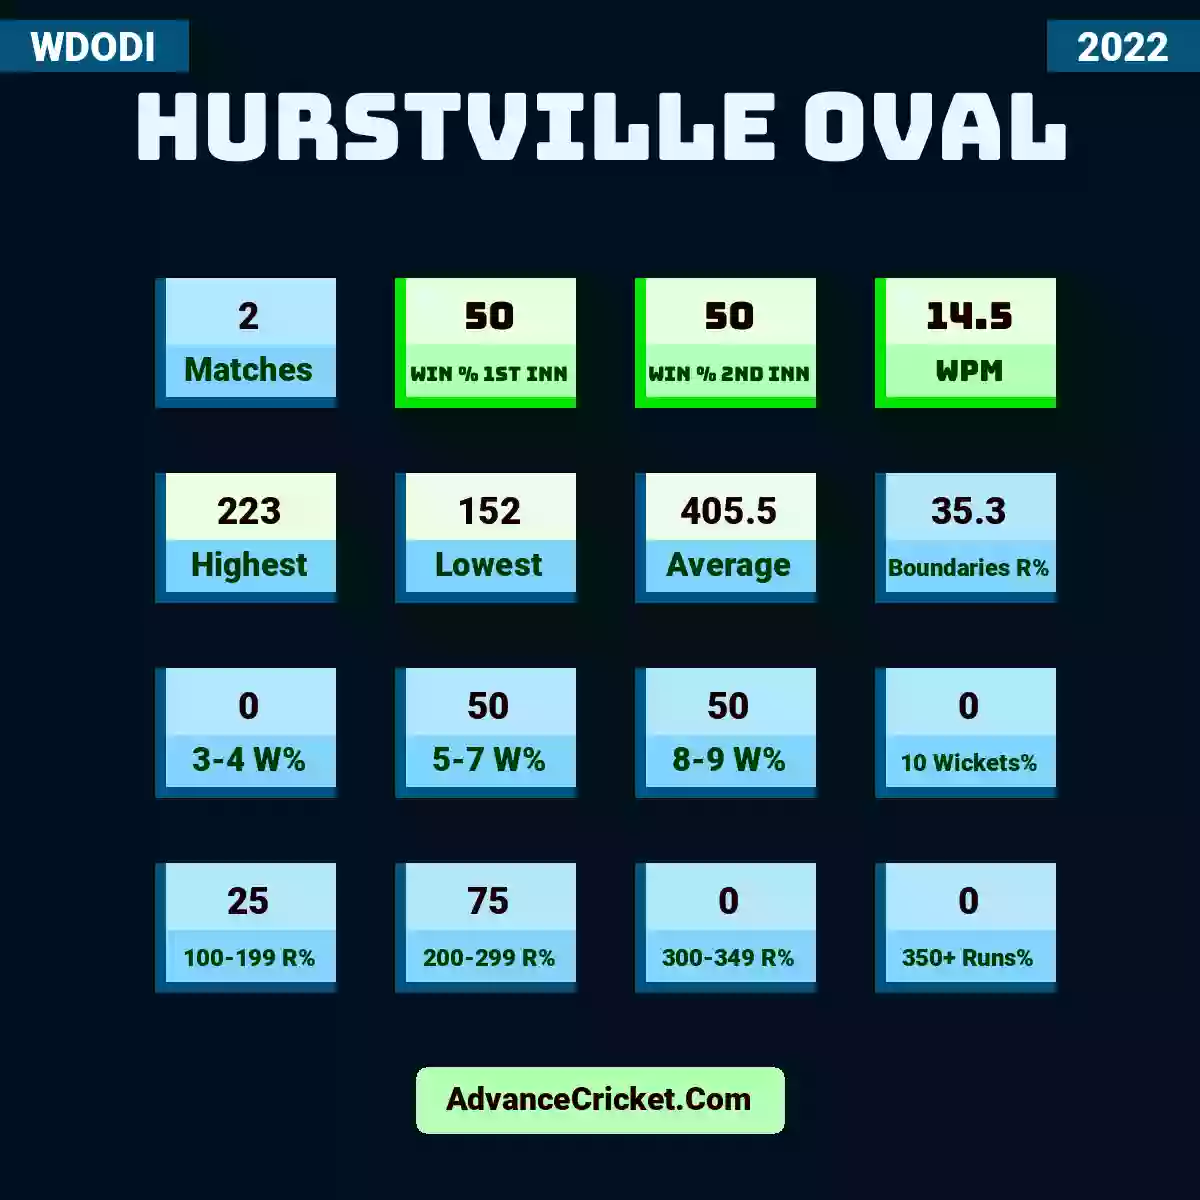 Image showing Hurstville Oval with Matches: 2, Win % 1st Inn: 50, Win % 2nd Inn: 50, WPM: 14.5, Highest: 223, Lowest: 152, Average: 405.5, Boundaries R%: 35.3, 3-4 W%: 0, 5-7 W%: 50, 8-9 W%: 50, 10 Wickets%: 0, 100-199 R%: 25, 200-299 R%: 75, 300-349 R%: 0, 350+ Runs%: 0.